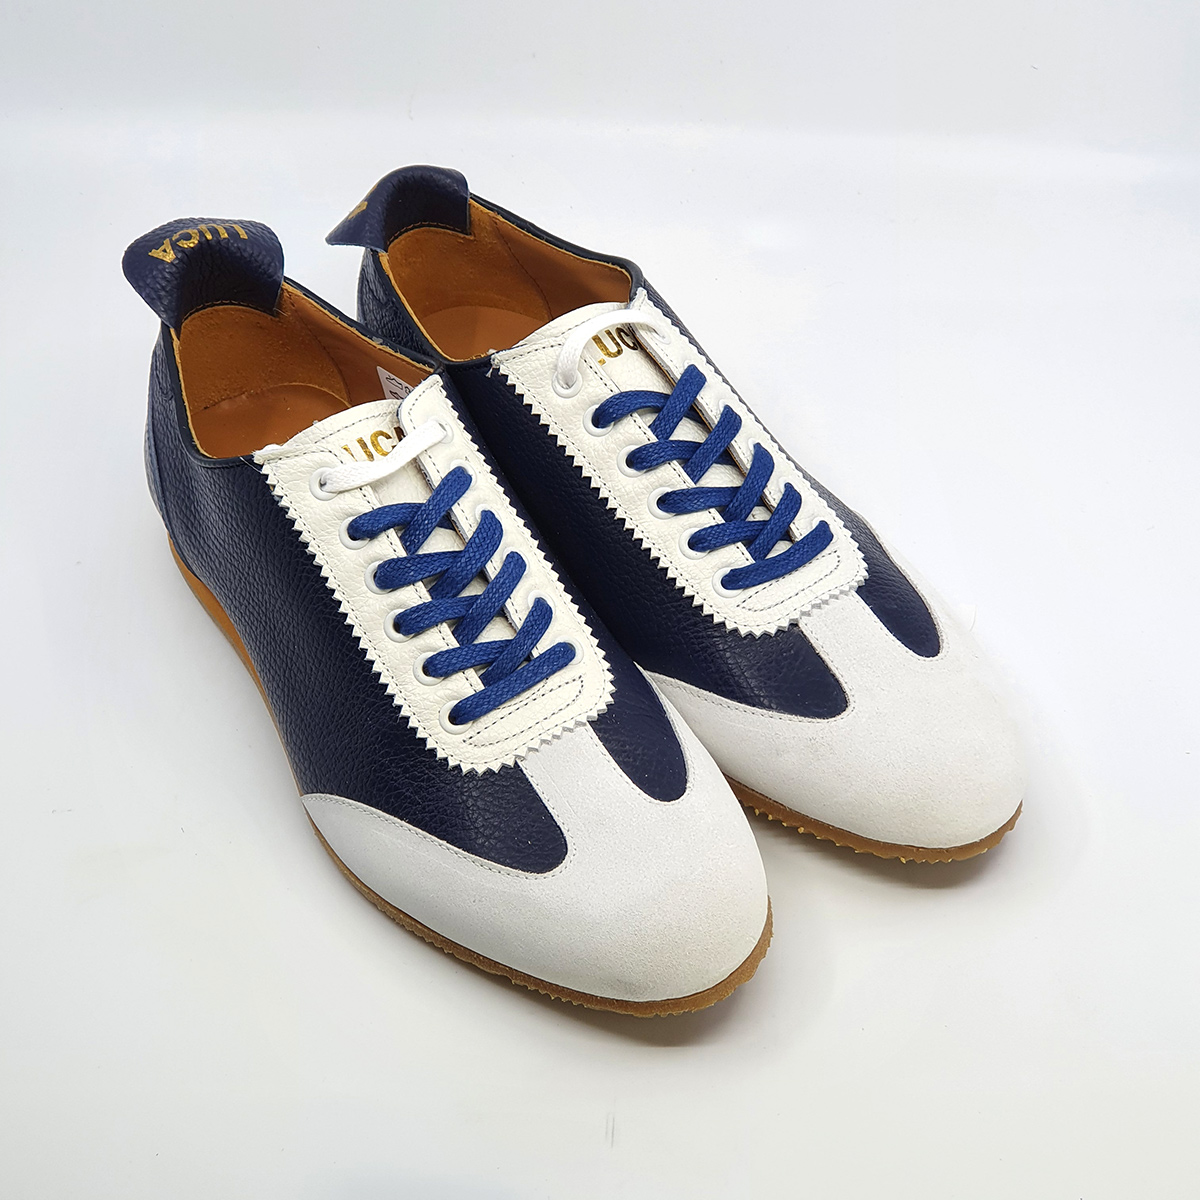 The Luca In Blue & White Leather & Suede – Old School Trainers – Mod Shoes